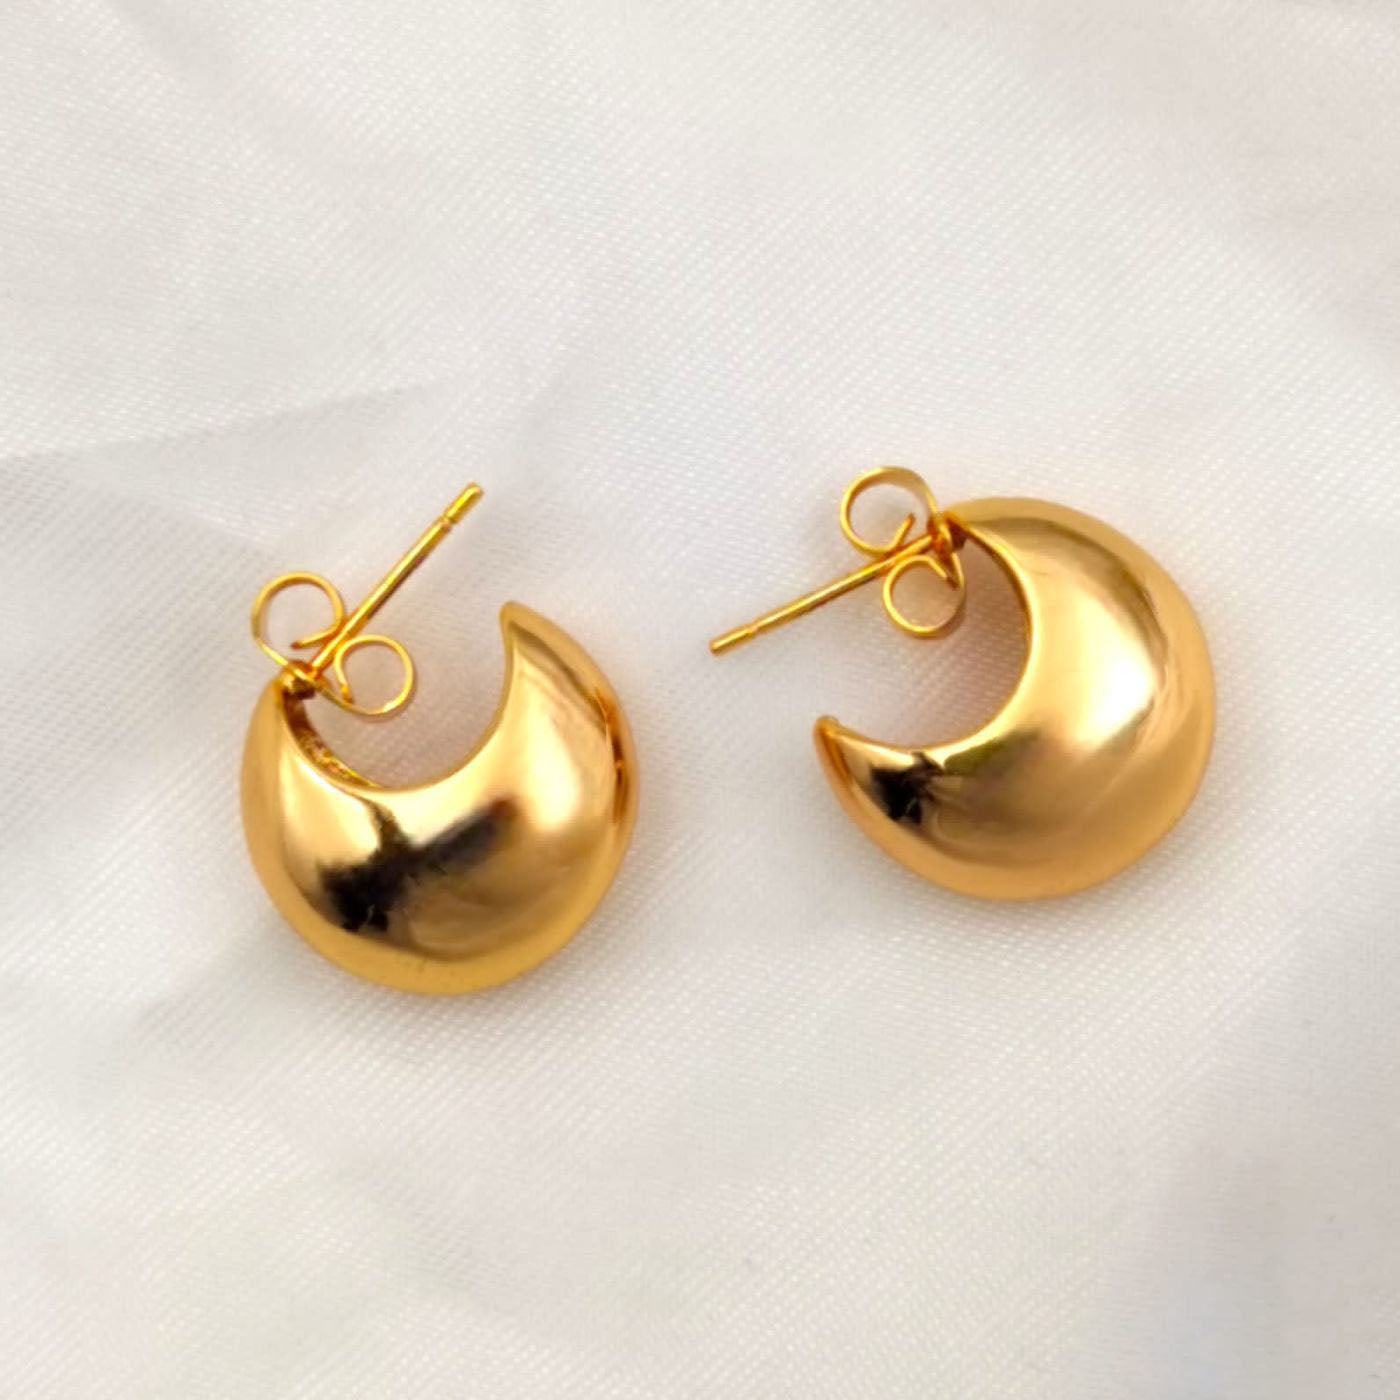 Drperfect 5 Pairs 18G Cartilage Earrings for Women  Ubuy India